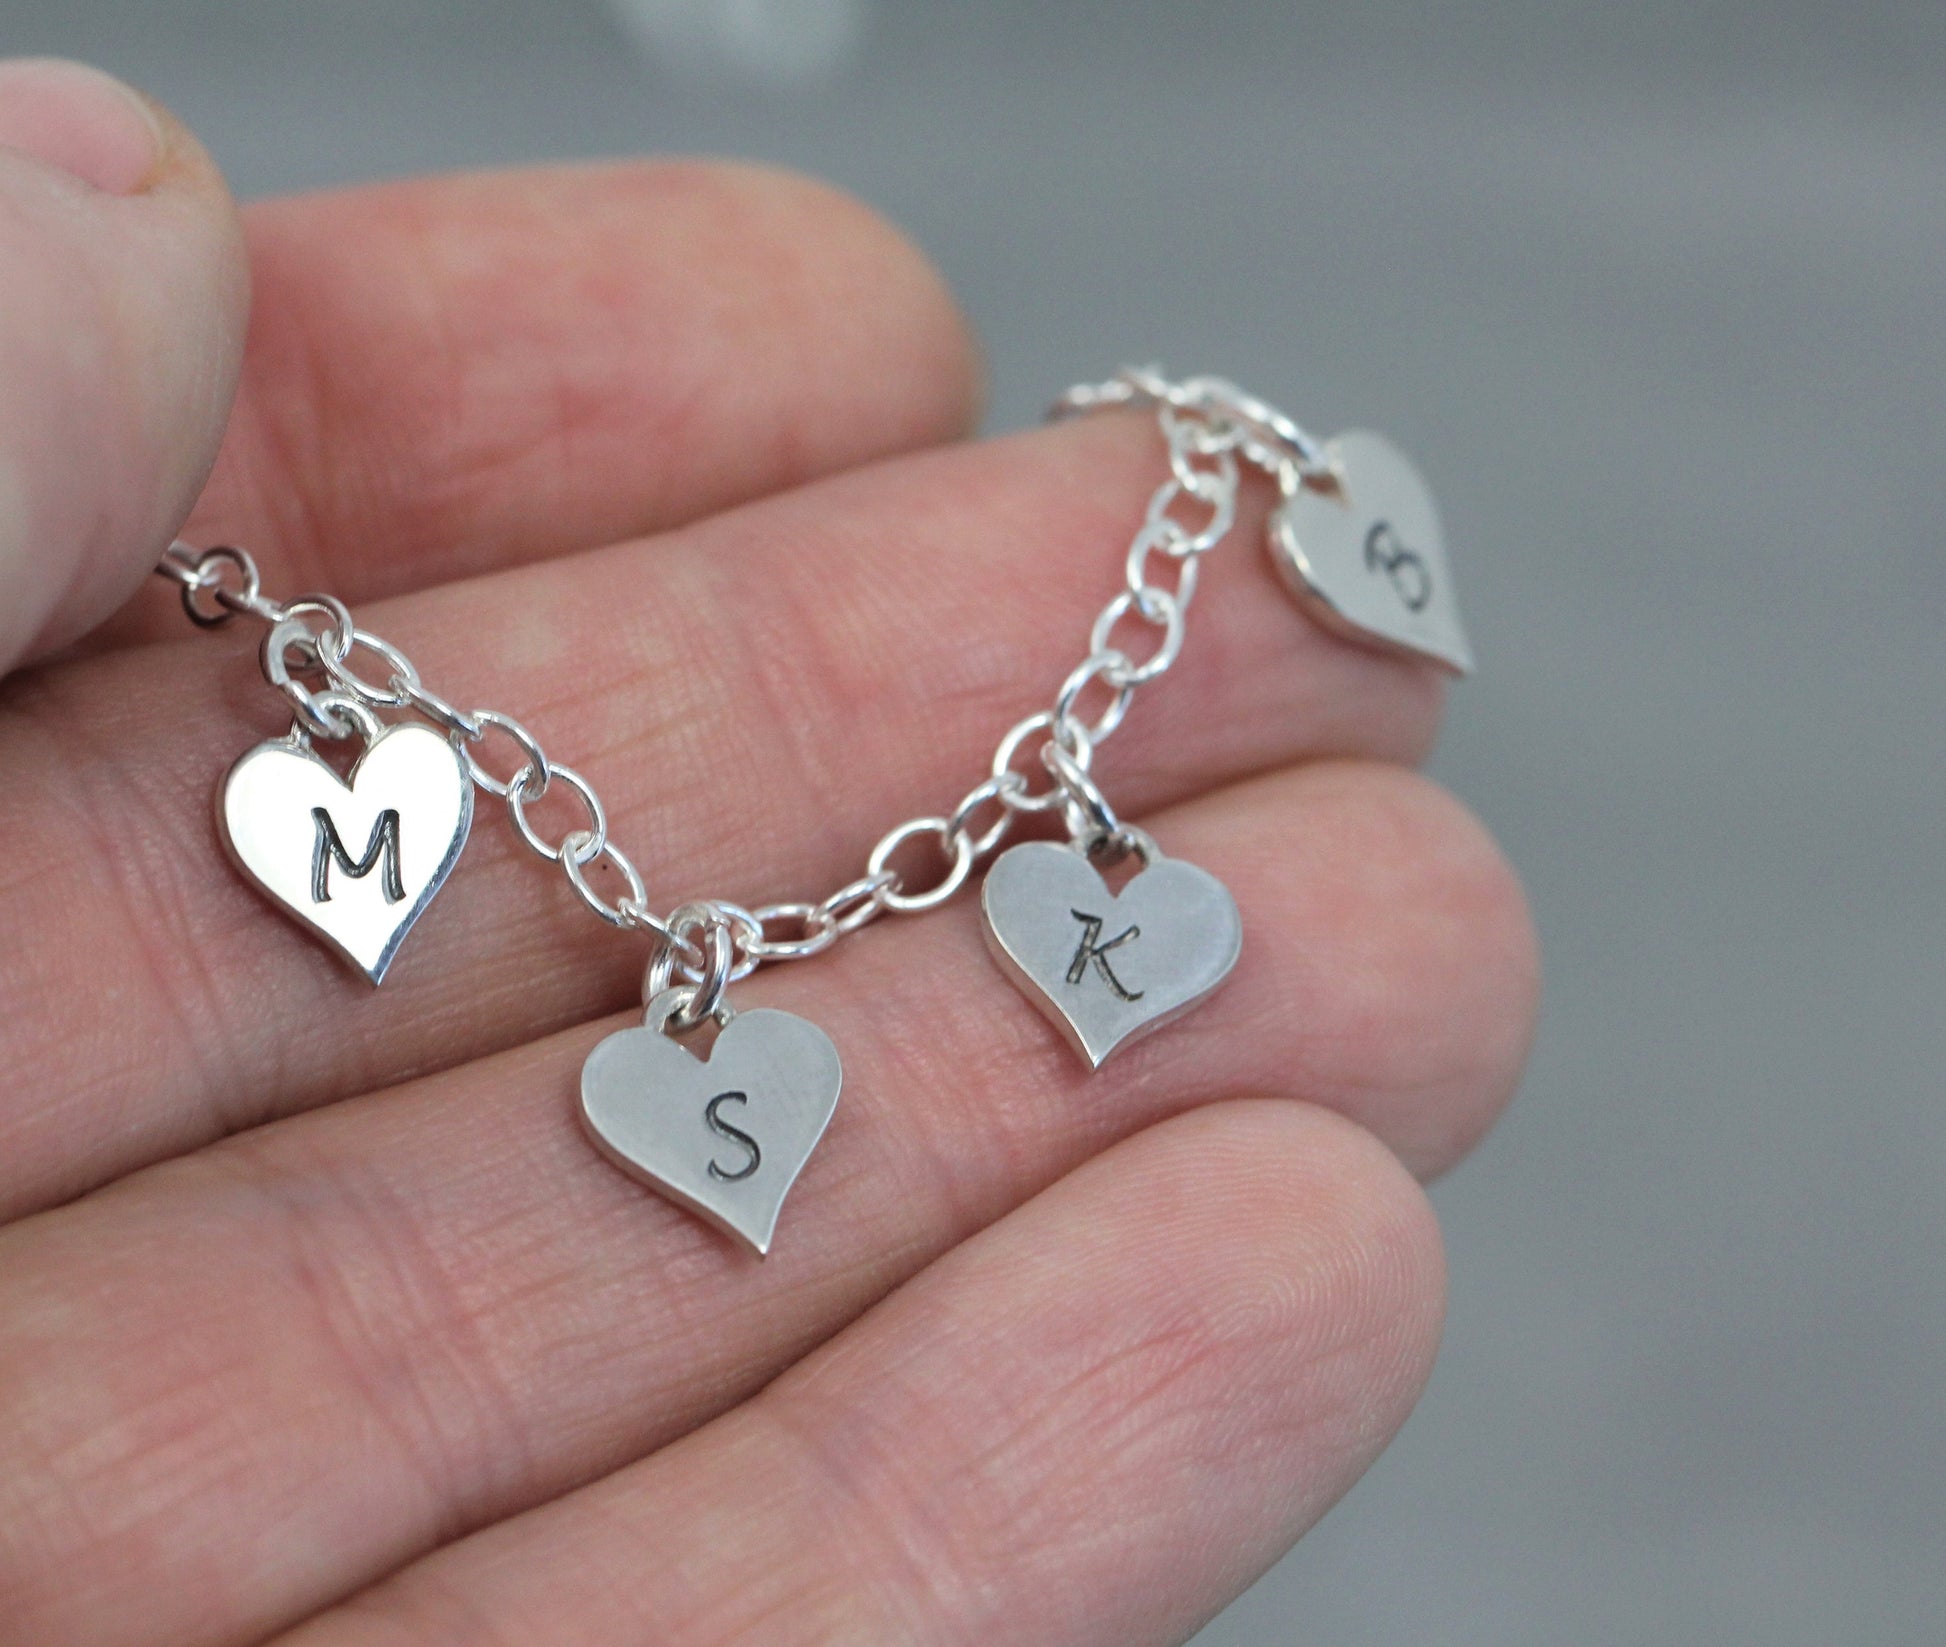 Size photo of heart charms in bracelet